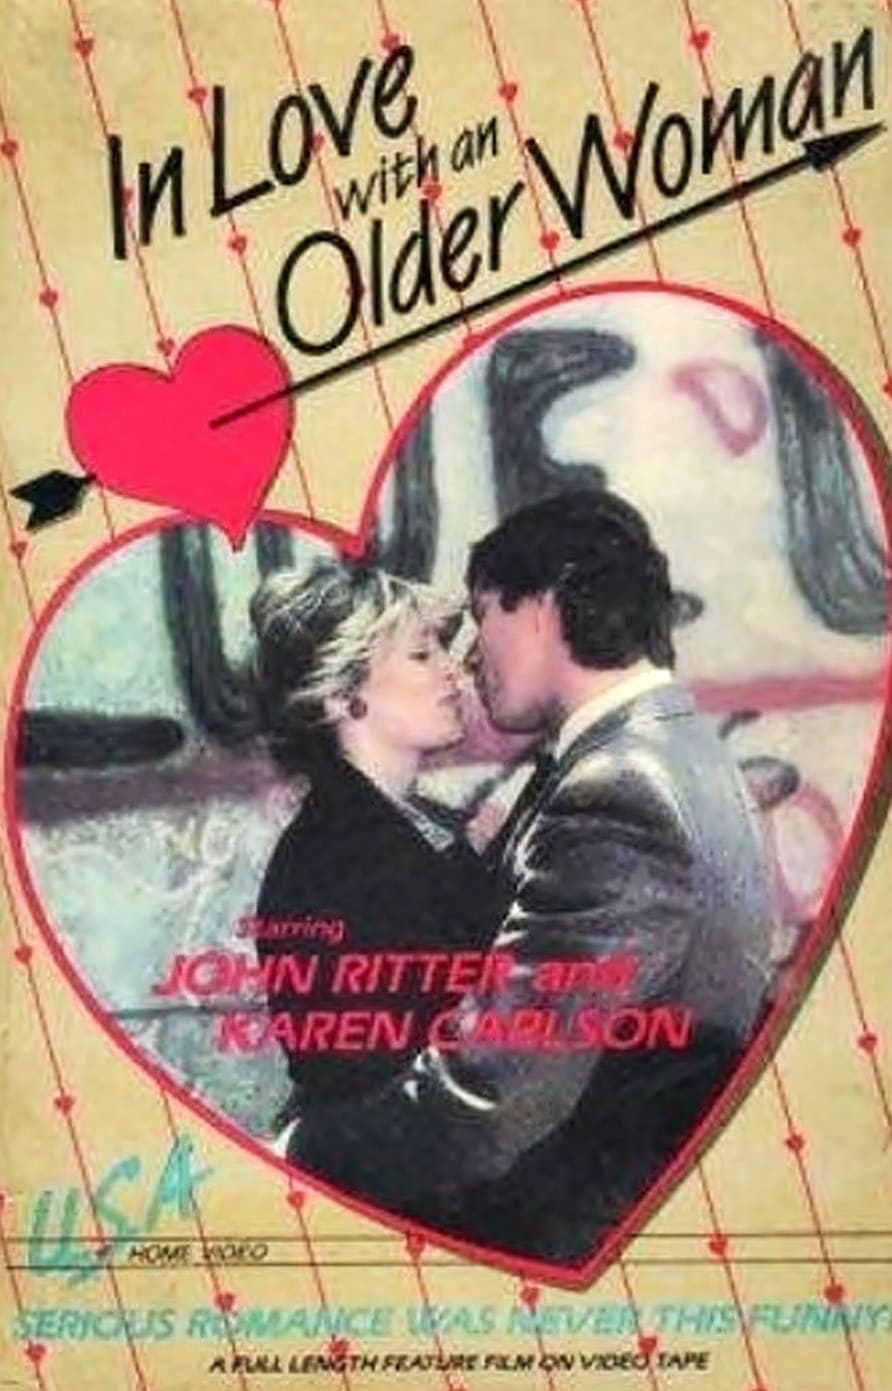 In Love with an Older Woman (1982)